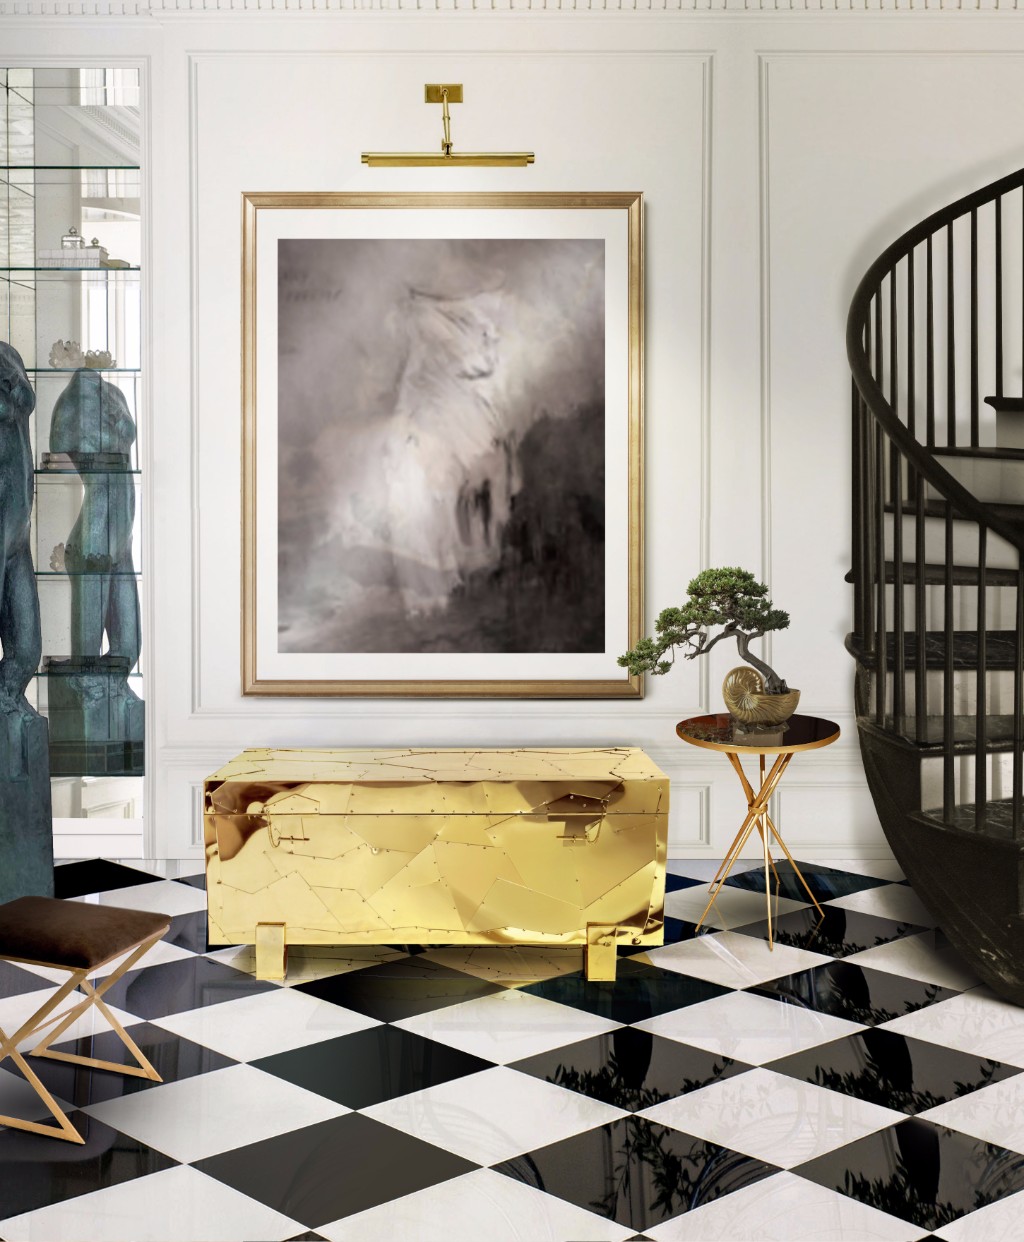 10 Dreamy Interiors with Black and White Checkered Floor